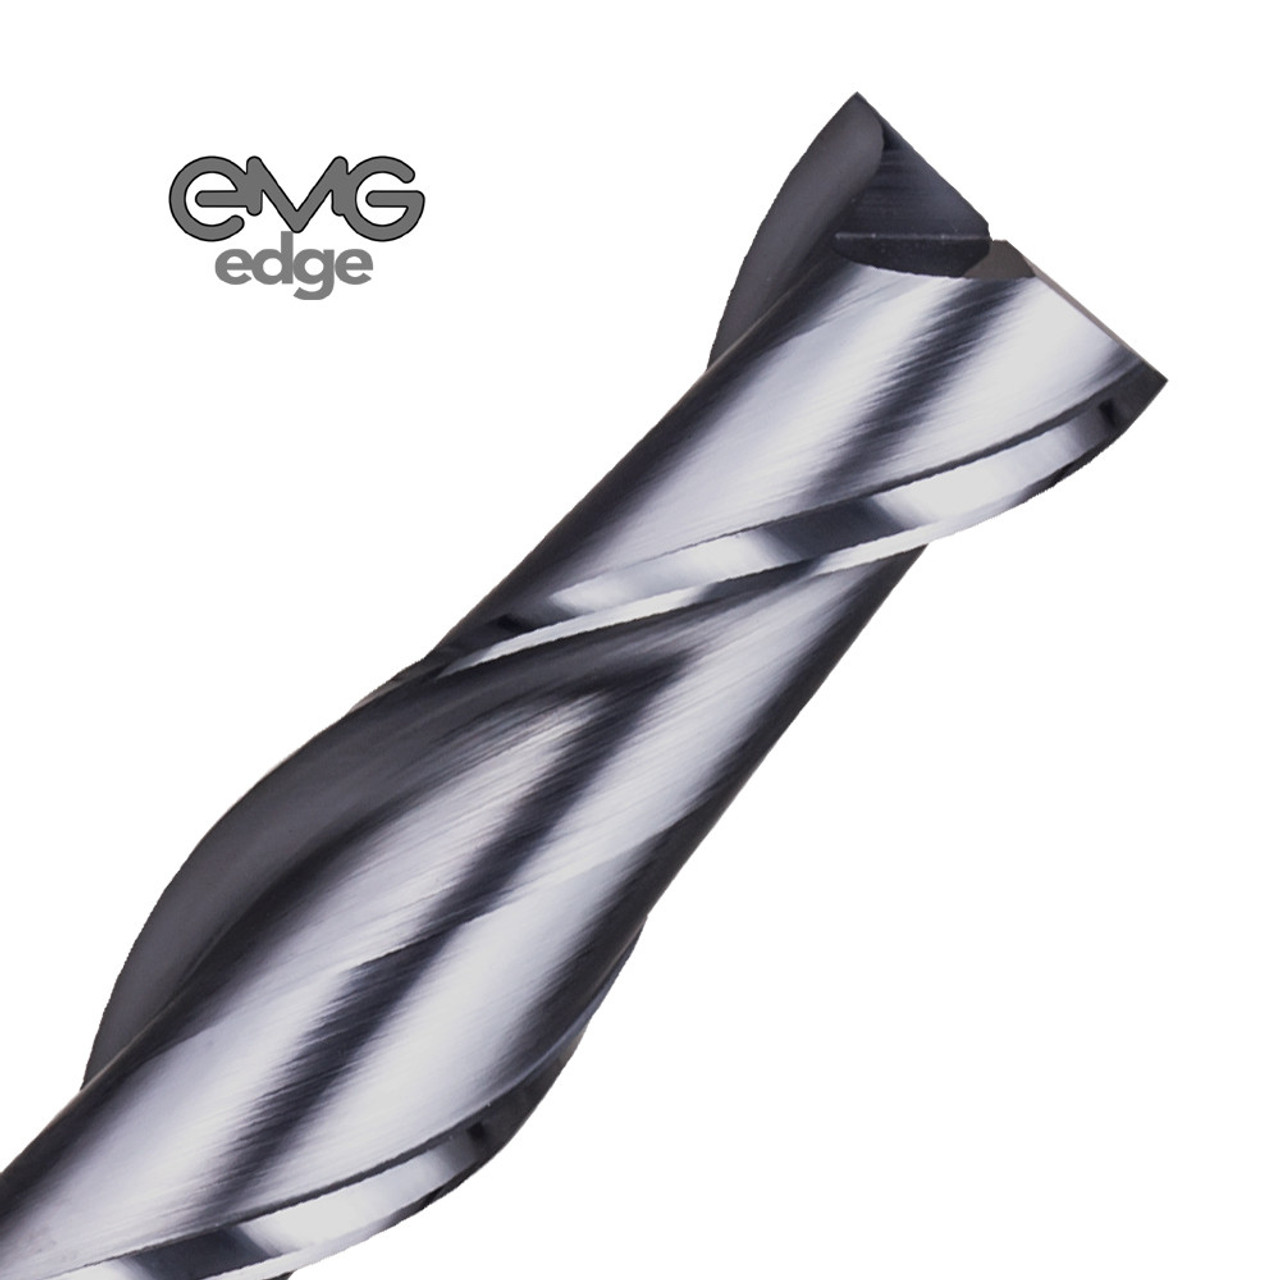 Parallel Cutters: Straight Edge Tool, Solid Carbide - 2L Inc.